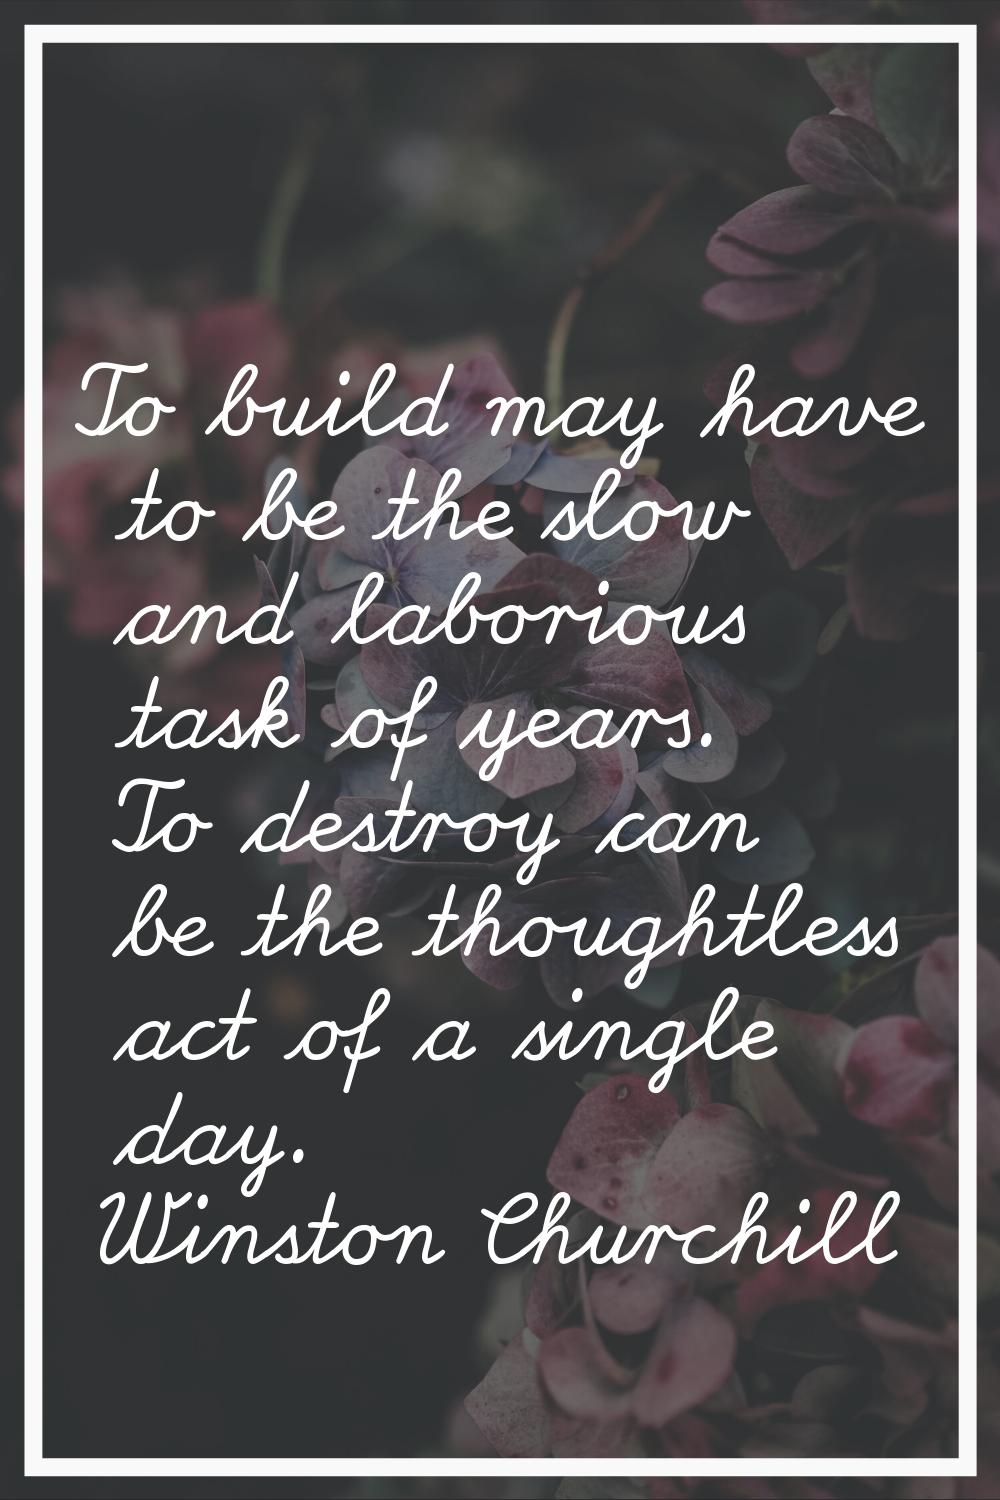 To build may have to be the slow and laborious task of years. To destroy can be the thoughtless act